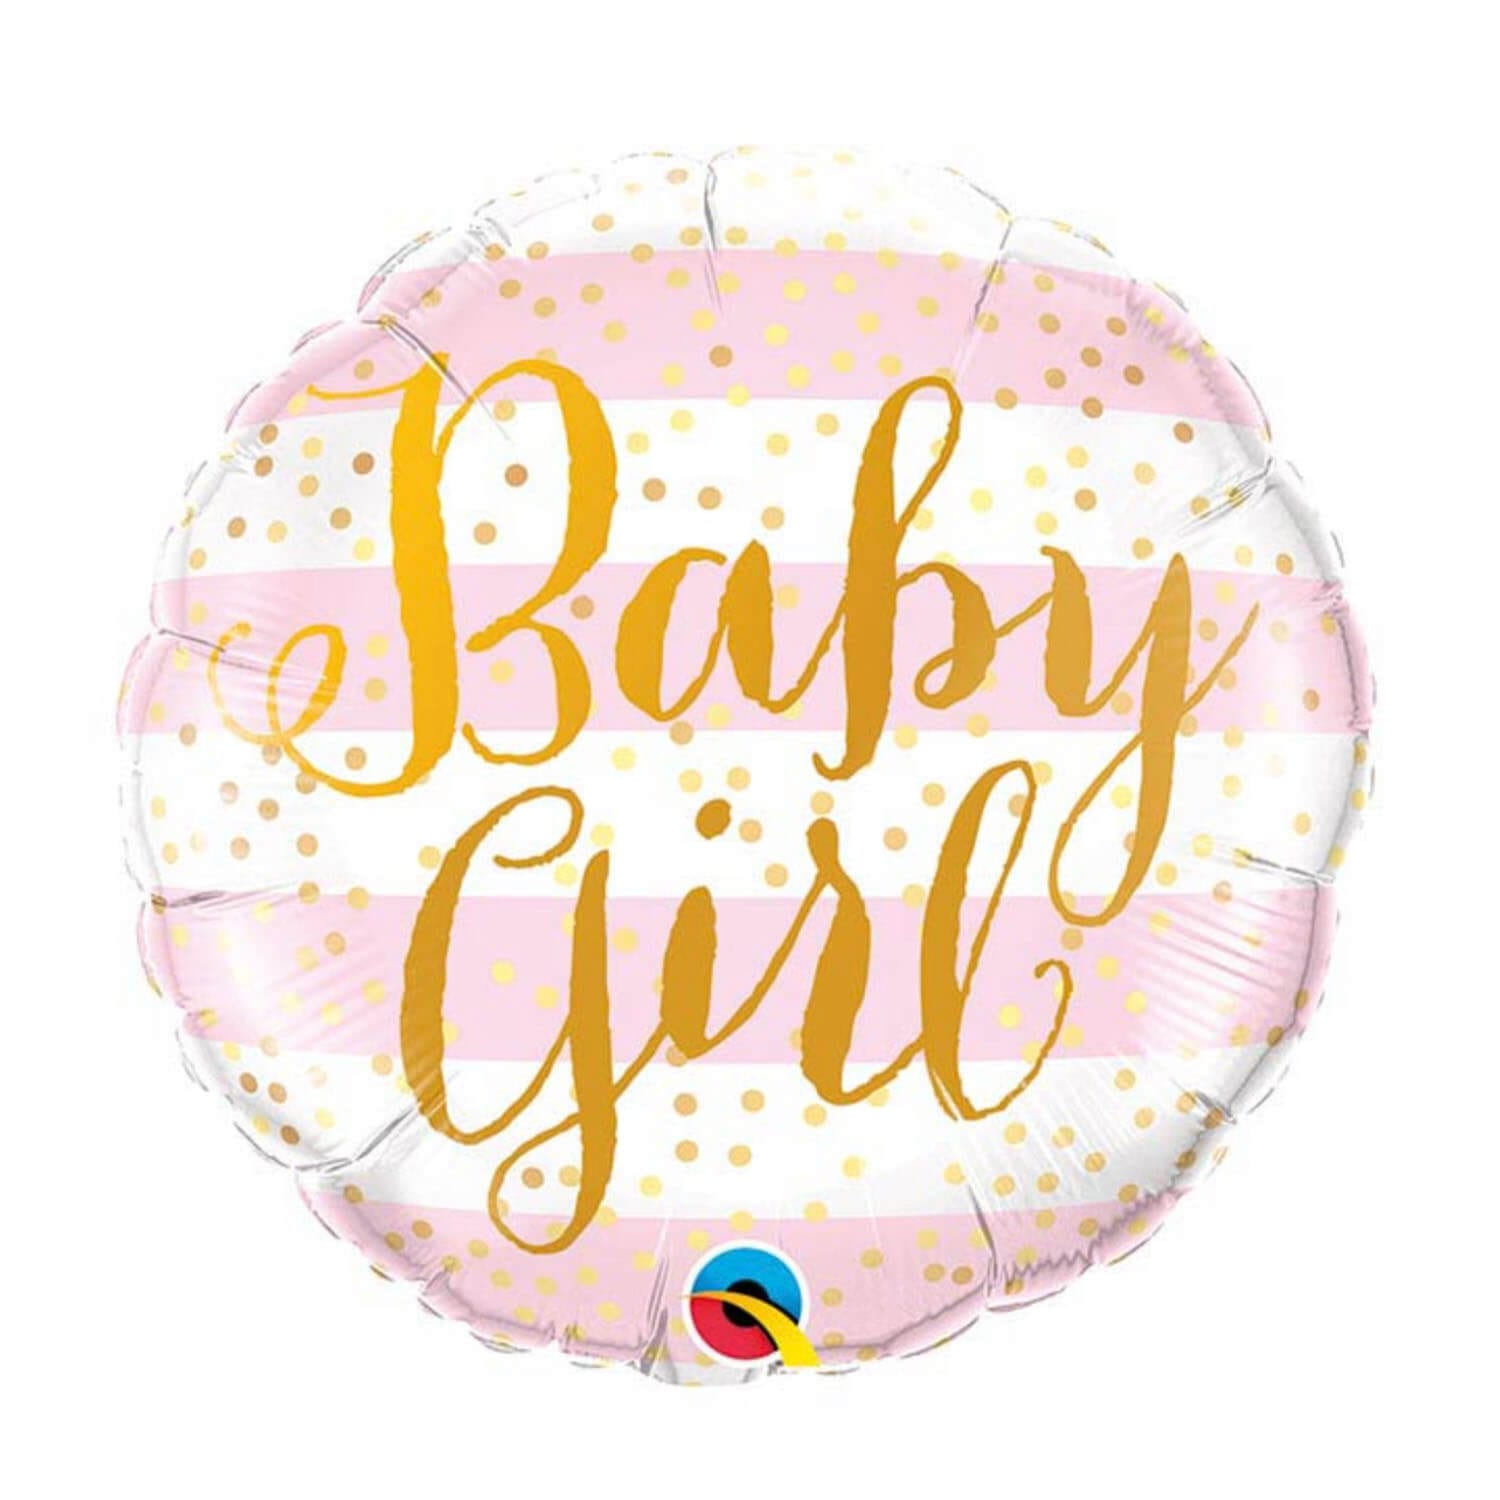 Pink striped mylar foil helium balloon with gold script reading “Baby Girl” for your baby shower from Just Peachy.